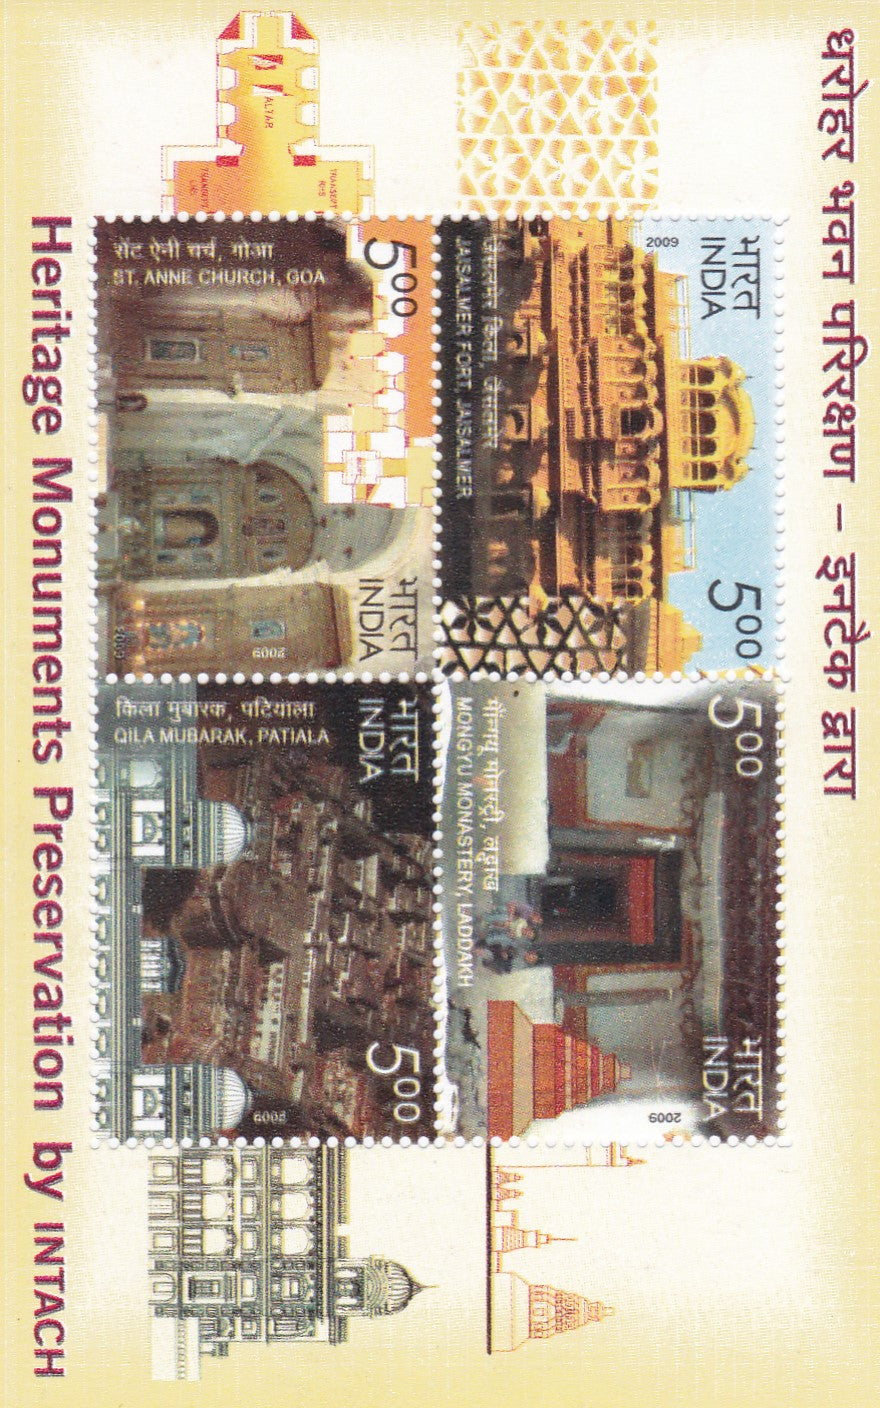 India-Miniature Sheet- Heritage Monuments Preservation by INTACH